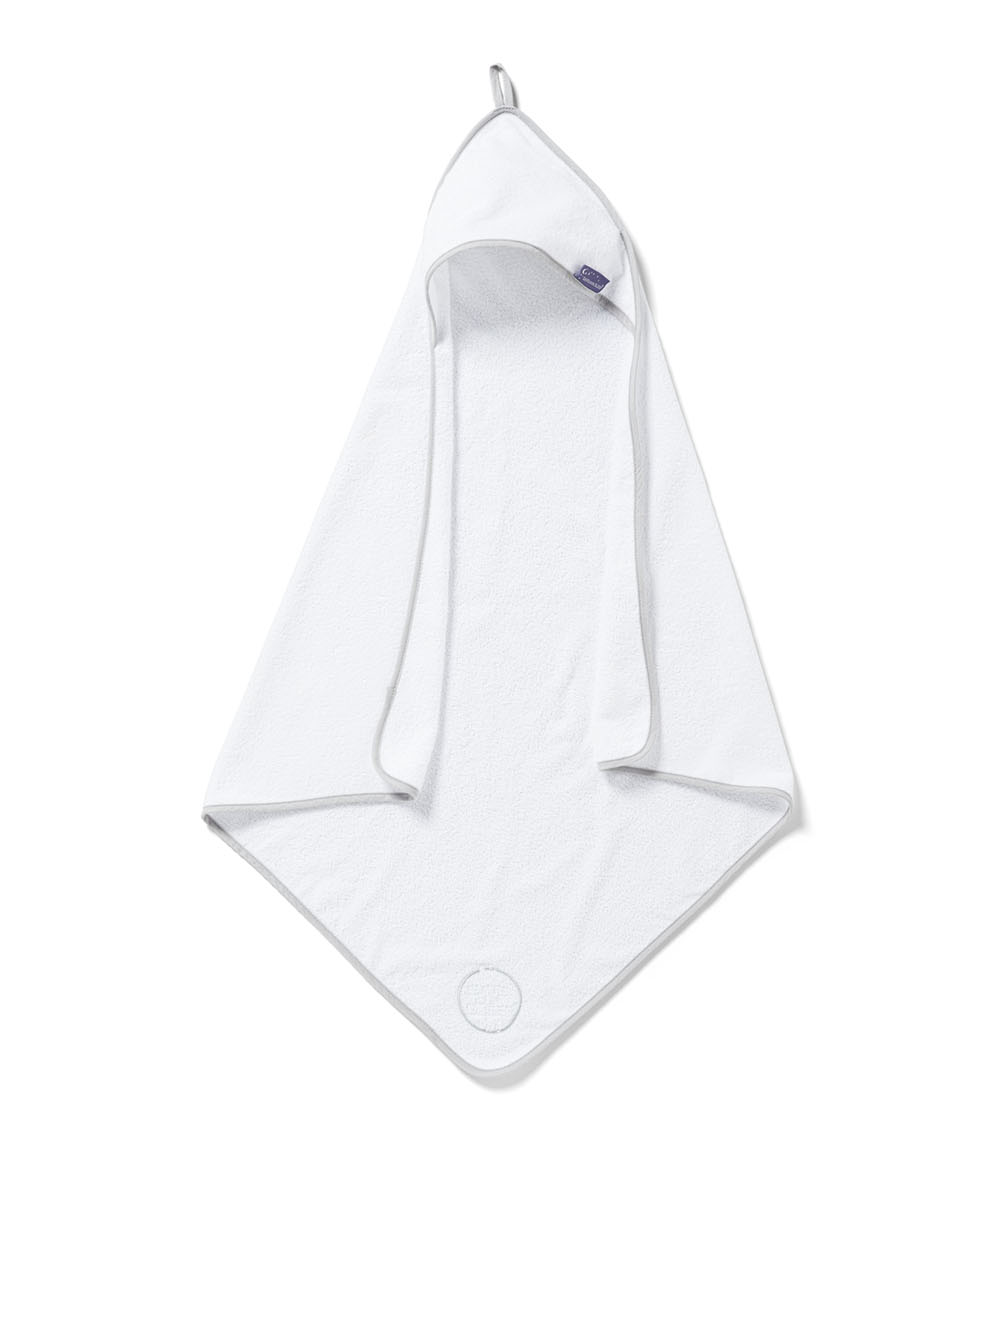 Towel Range - Save Our Sleep® Official Online Shop